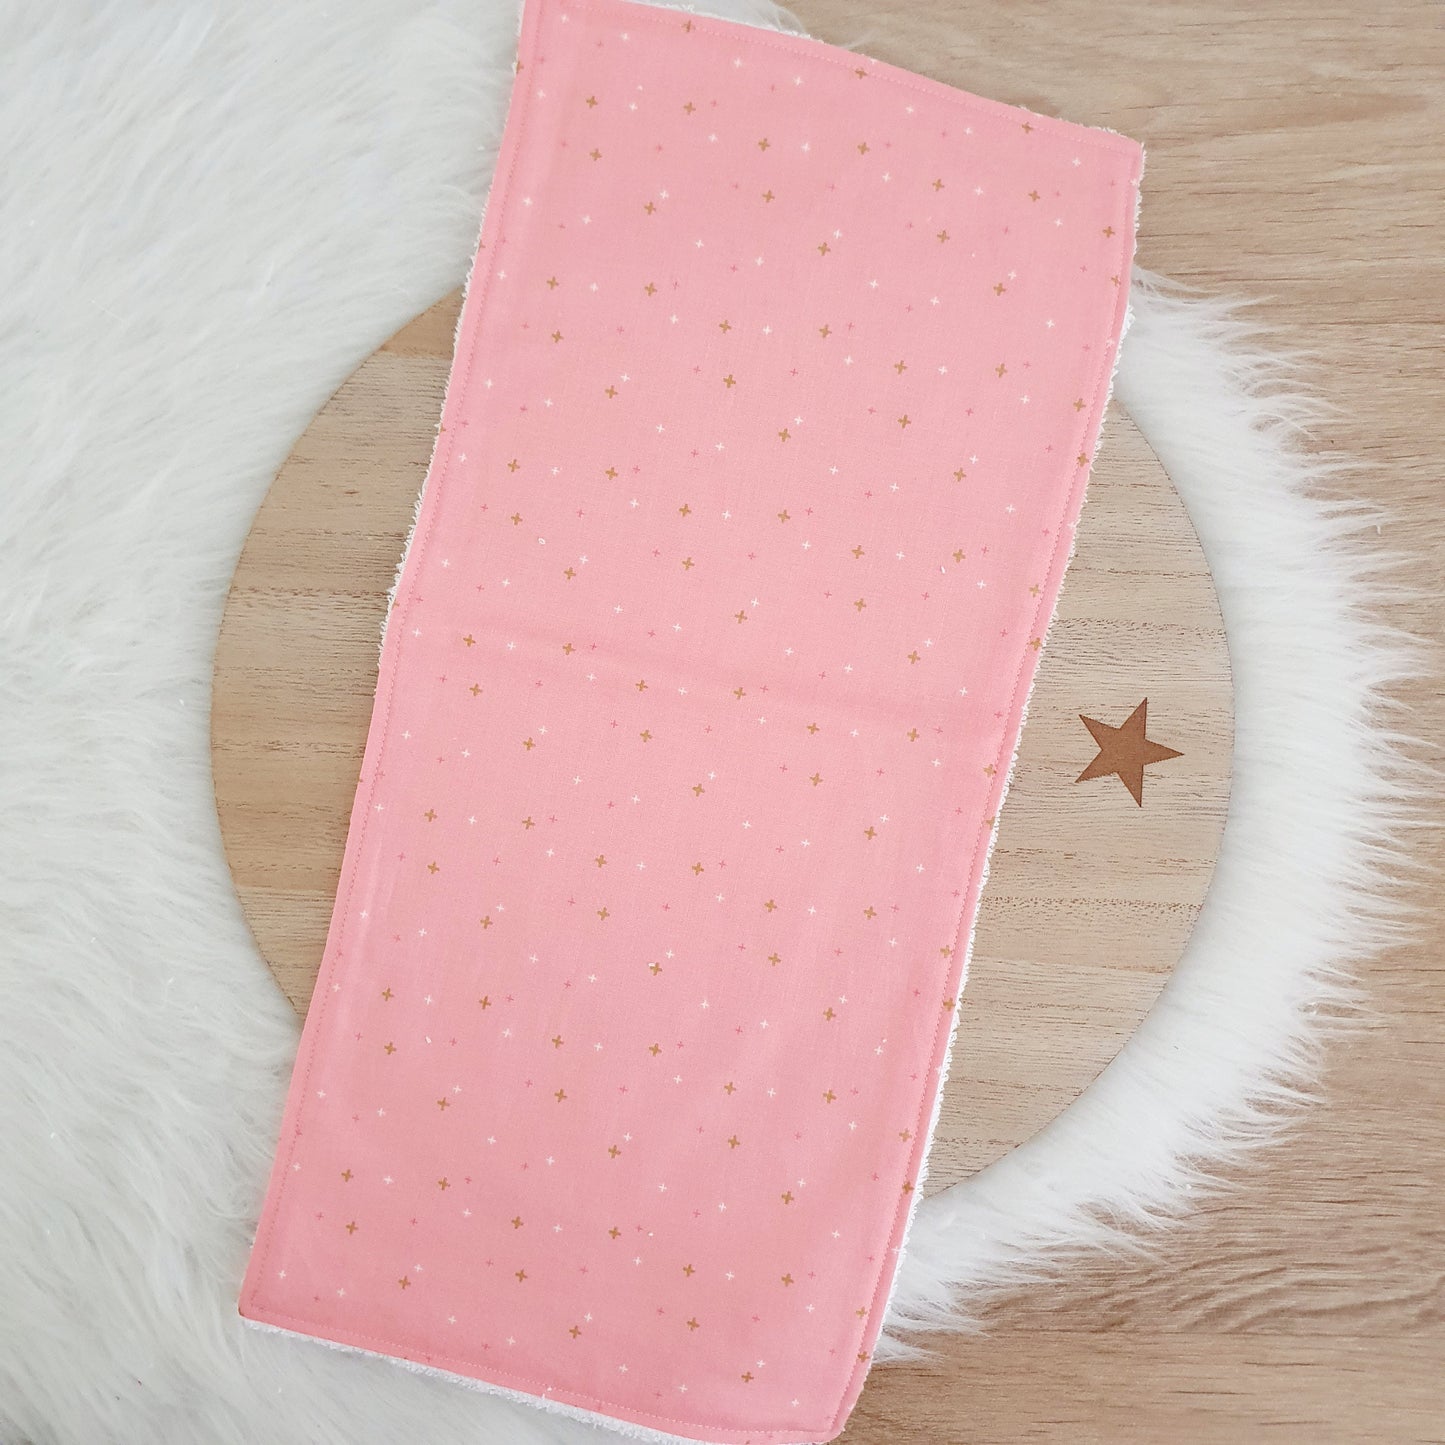 Burp Cloth | Baby Burp Cloths | Baby Shower Gift | Bamboo Backed Ultra Absorbent Towelling - CORAL